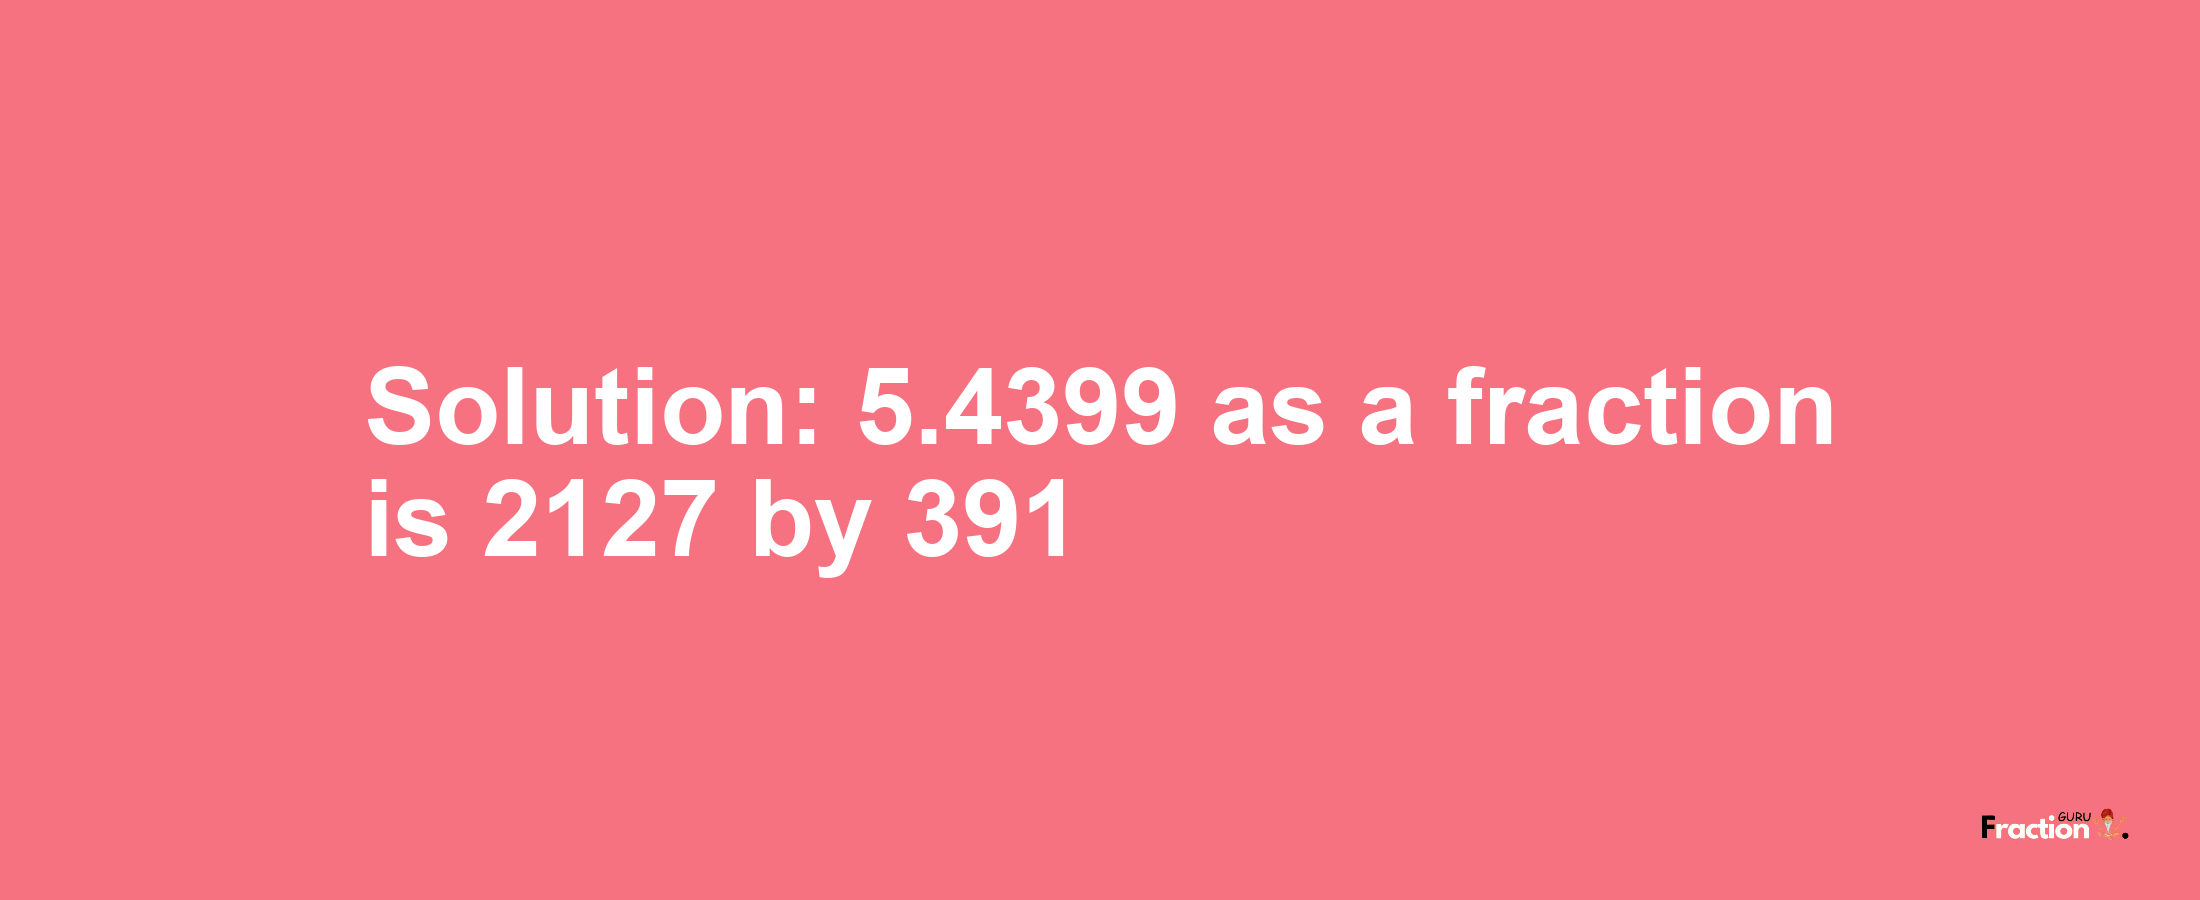 Solution:5.4399 as a fraction is 2127/391